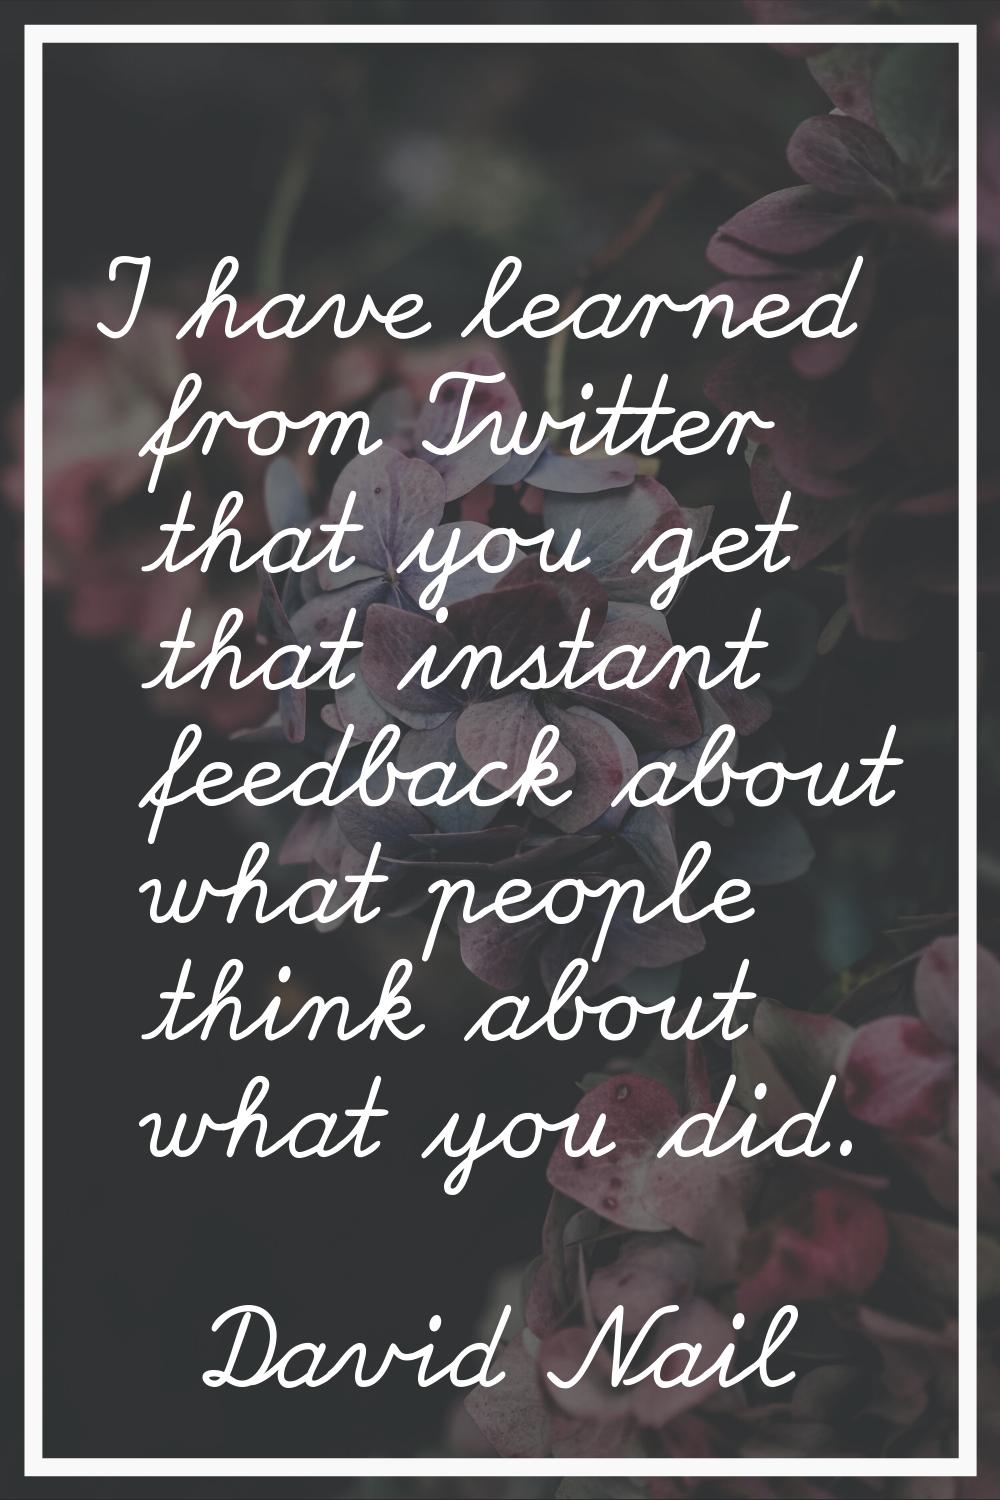 I have learned from Twitter that you get that instant feedback about what people think about what y